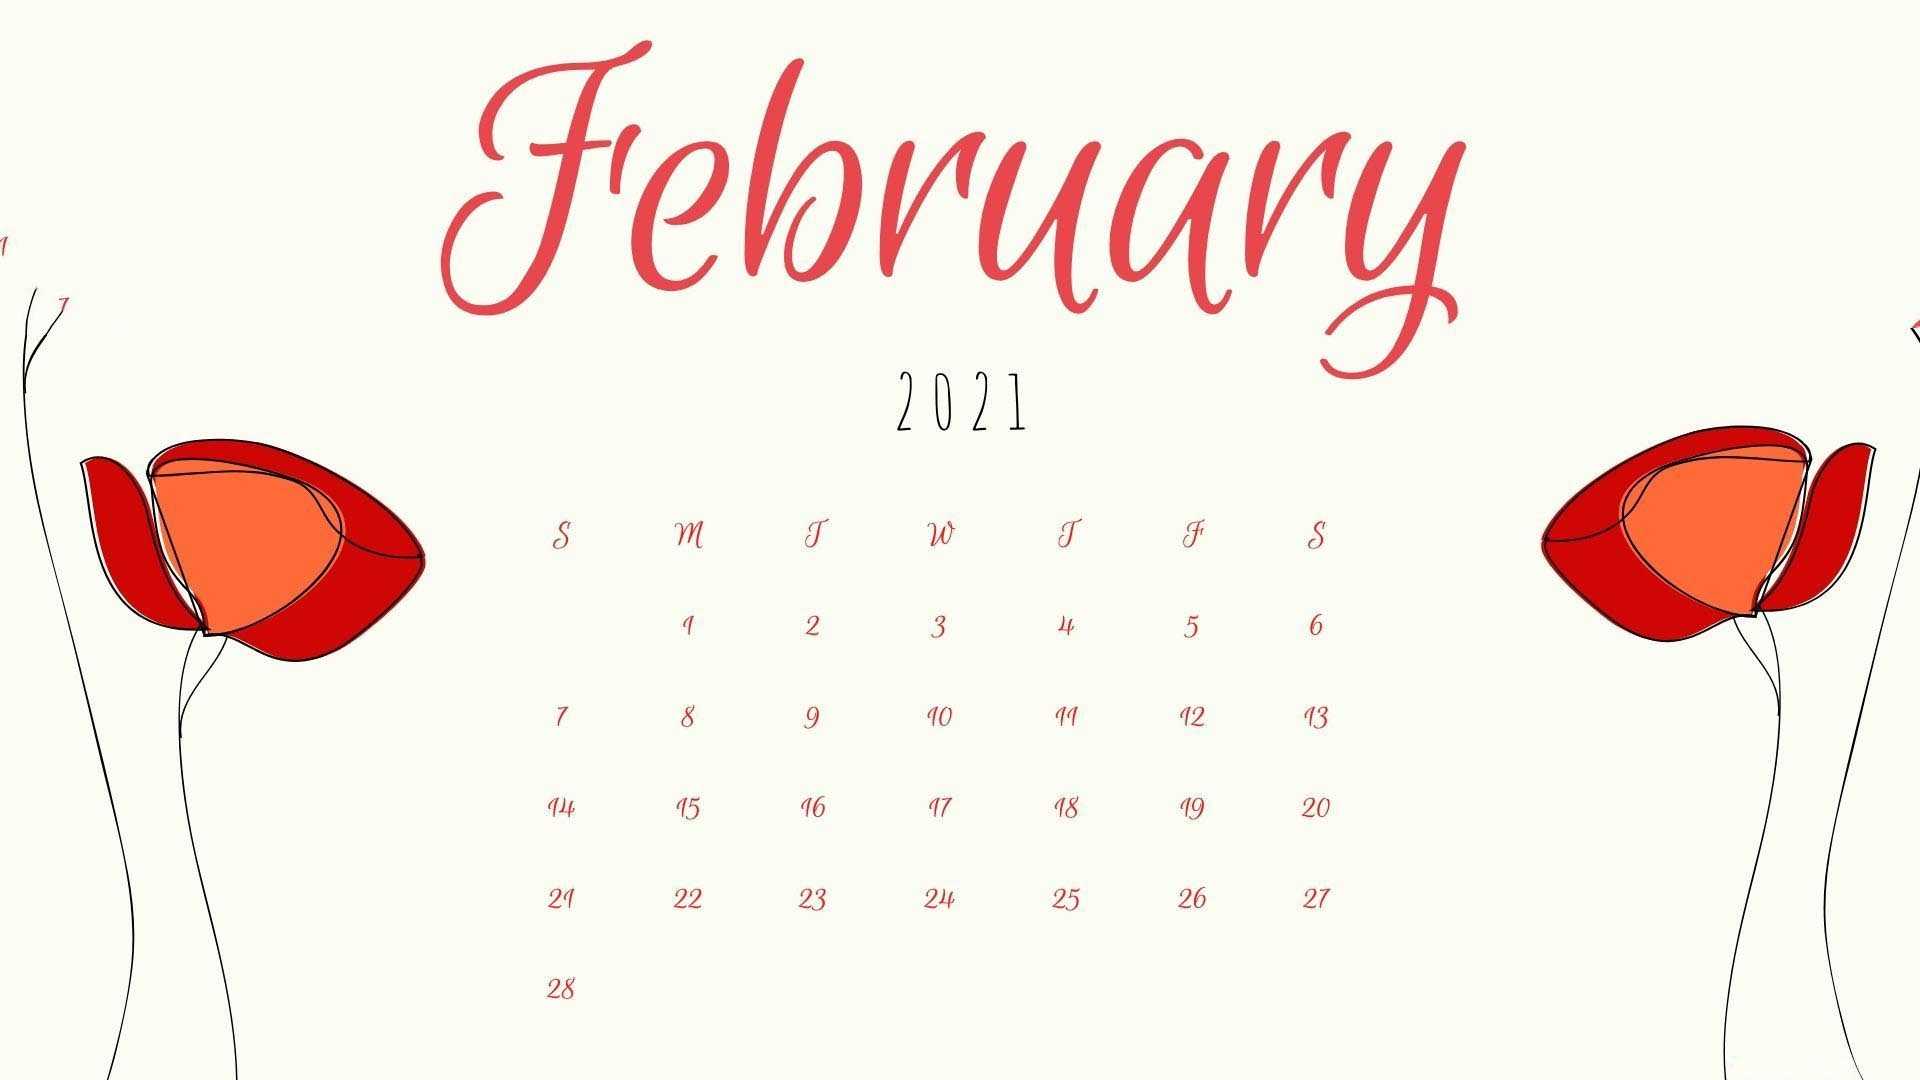 February 2021 Calendar Wallpapers Kolpaper Awesome Free Hd Wallpapers Tons of awesome february 2021 calendar wallpapers to download for free. february 2021 calendar wallpapers